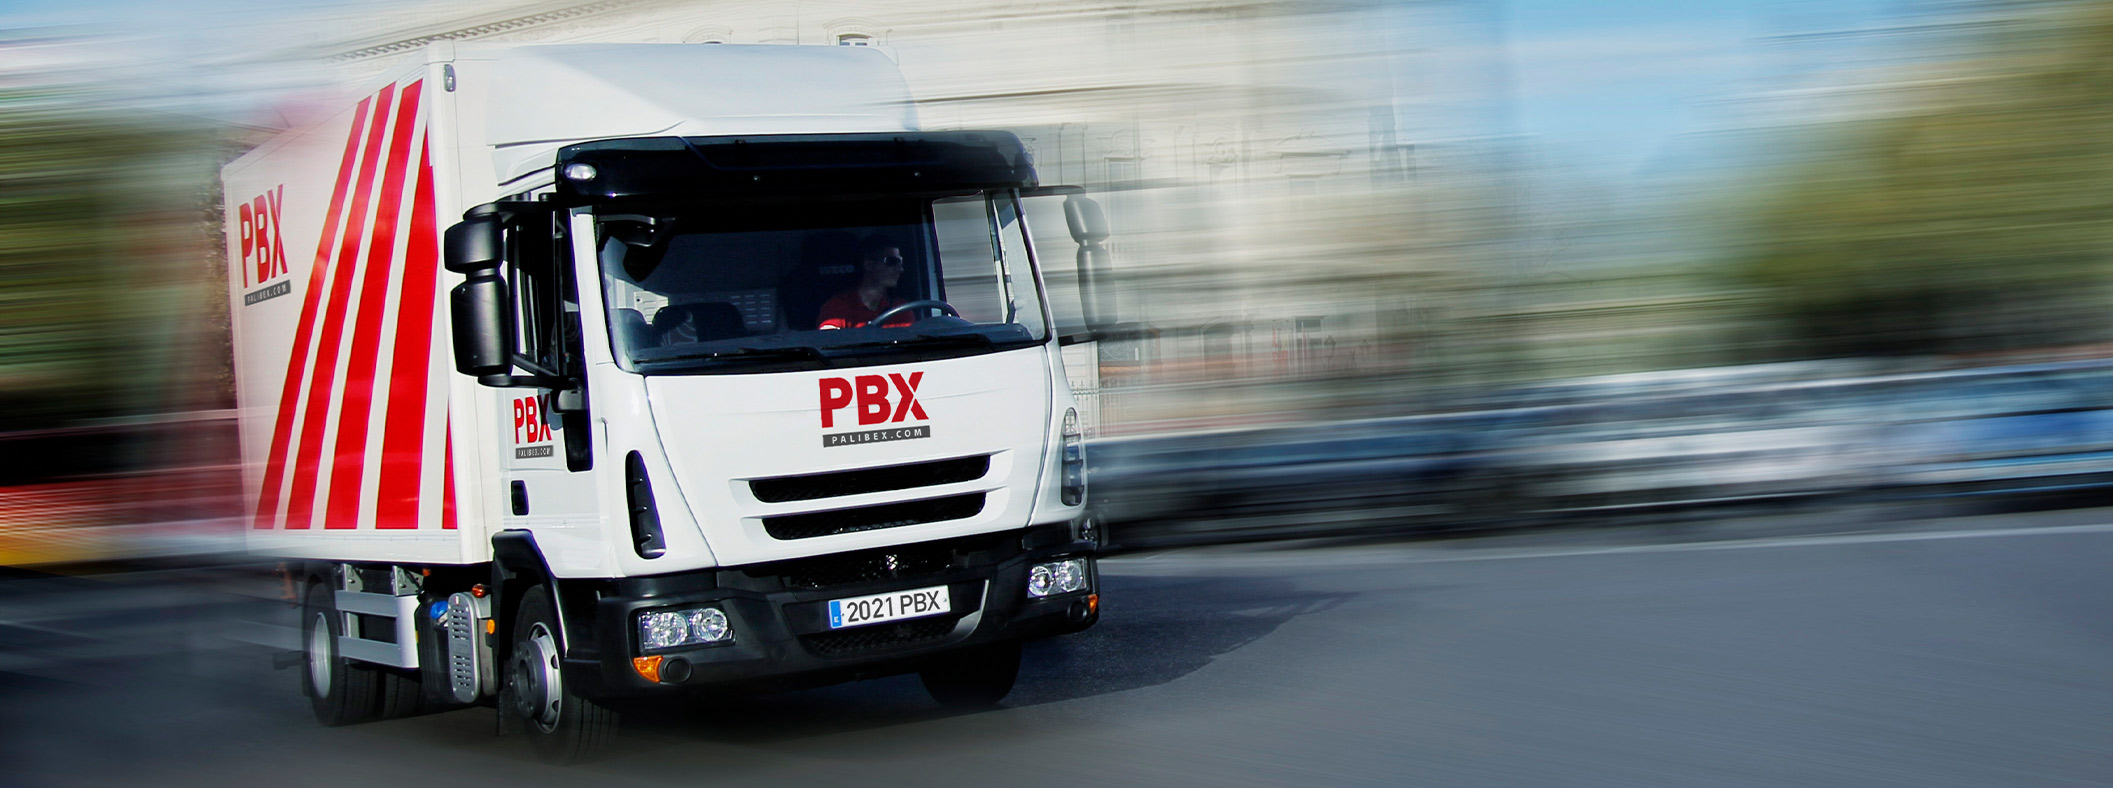 Pallet transport Spain to Europe - palibex